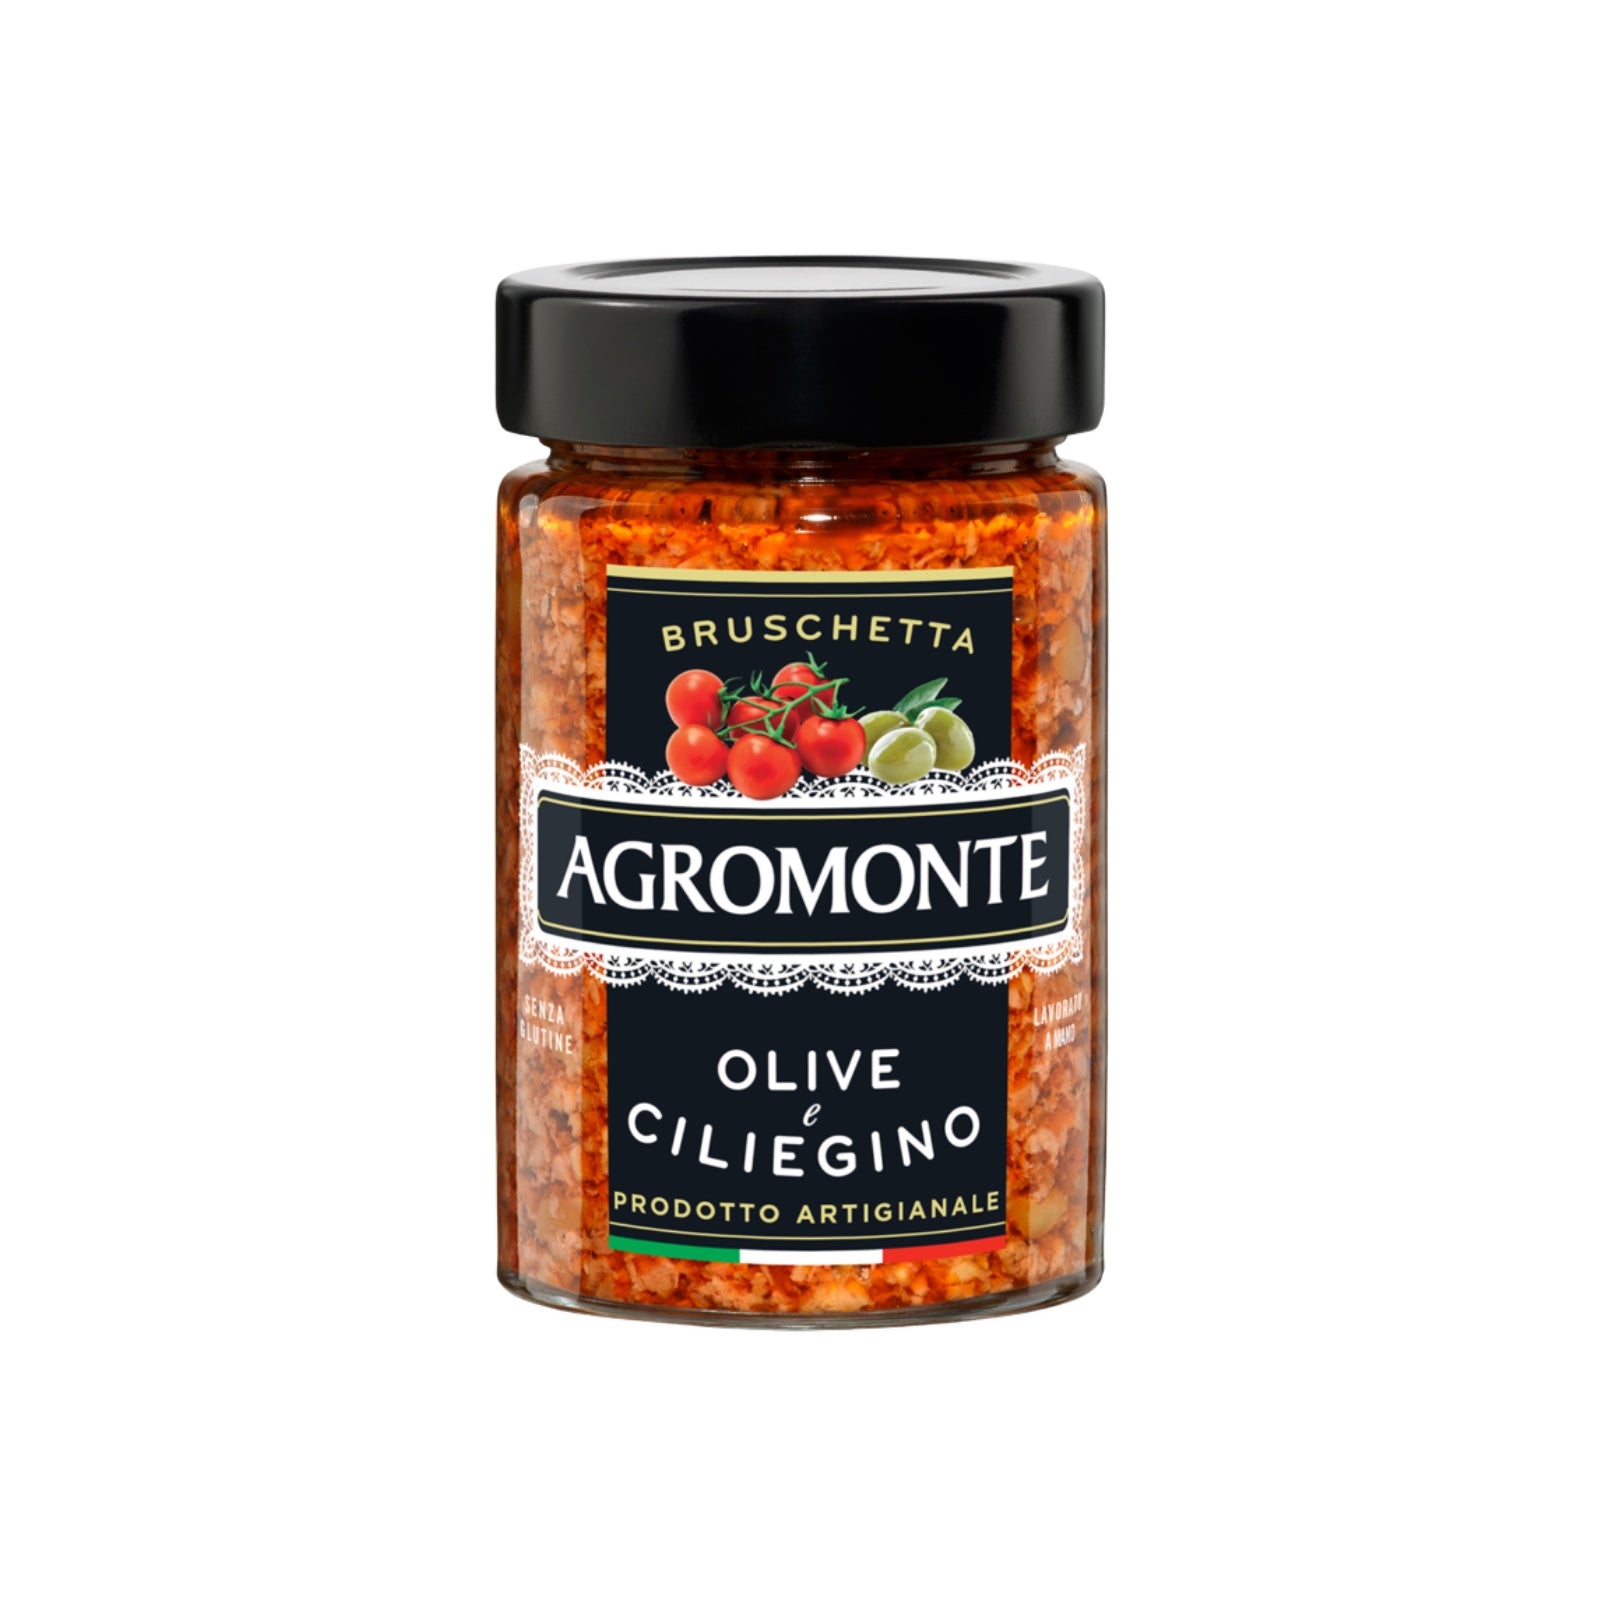 Agromonte bruschetta olives and cherry tomatoes 100g